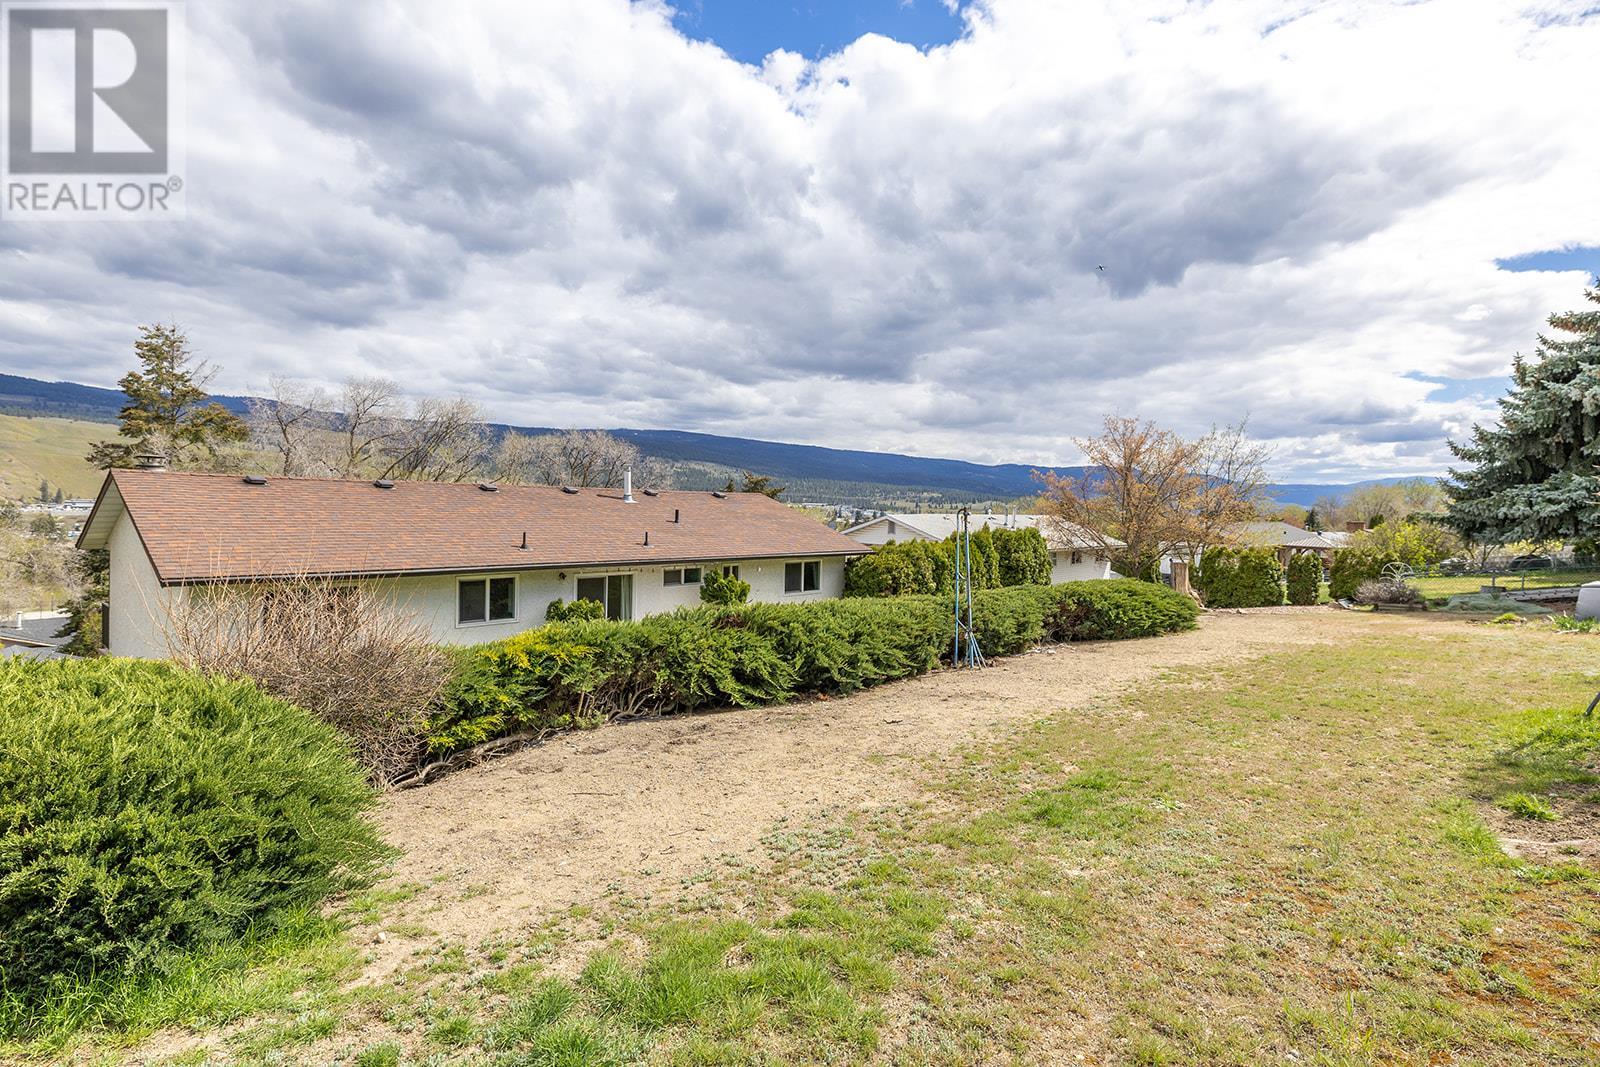  9770 Winview Road, Lake Country